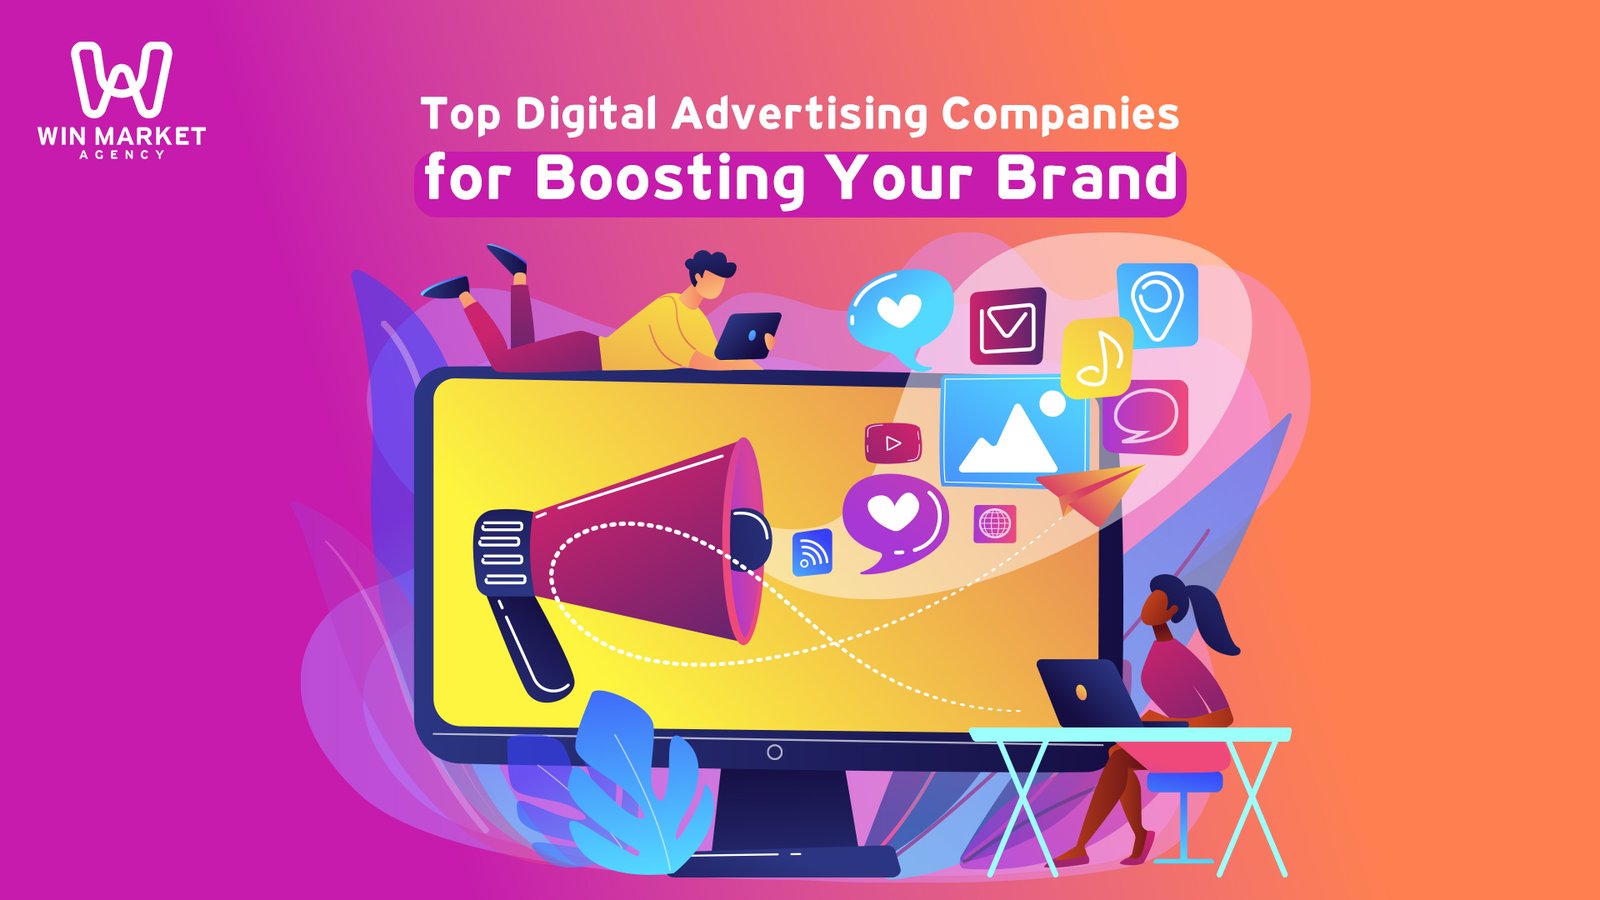 Top Digital Advertising Companies for Boosting Your Brand.